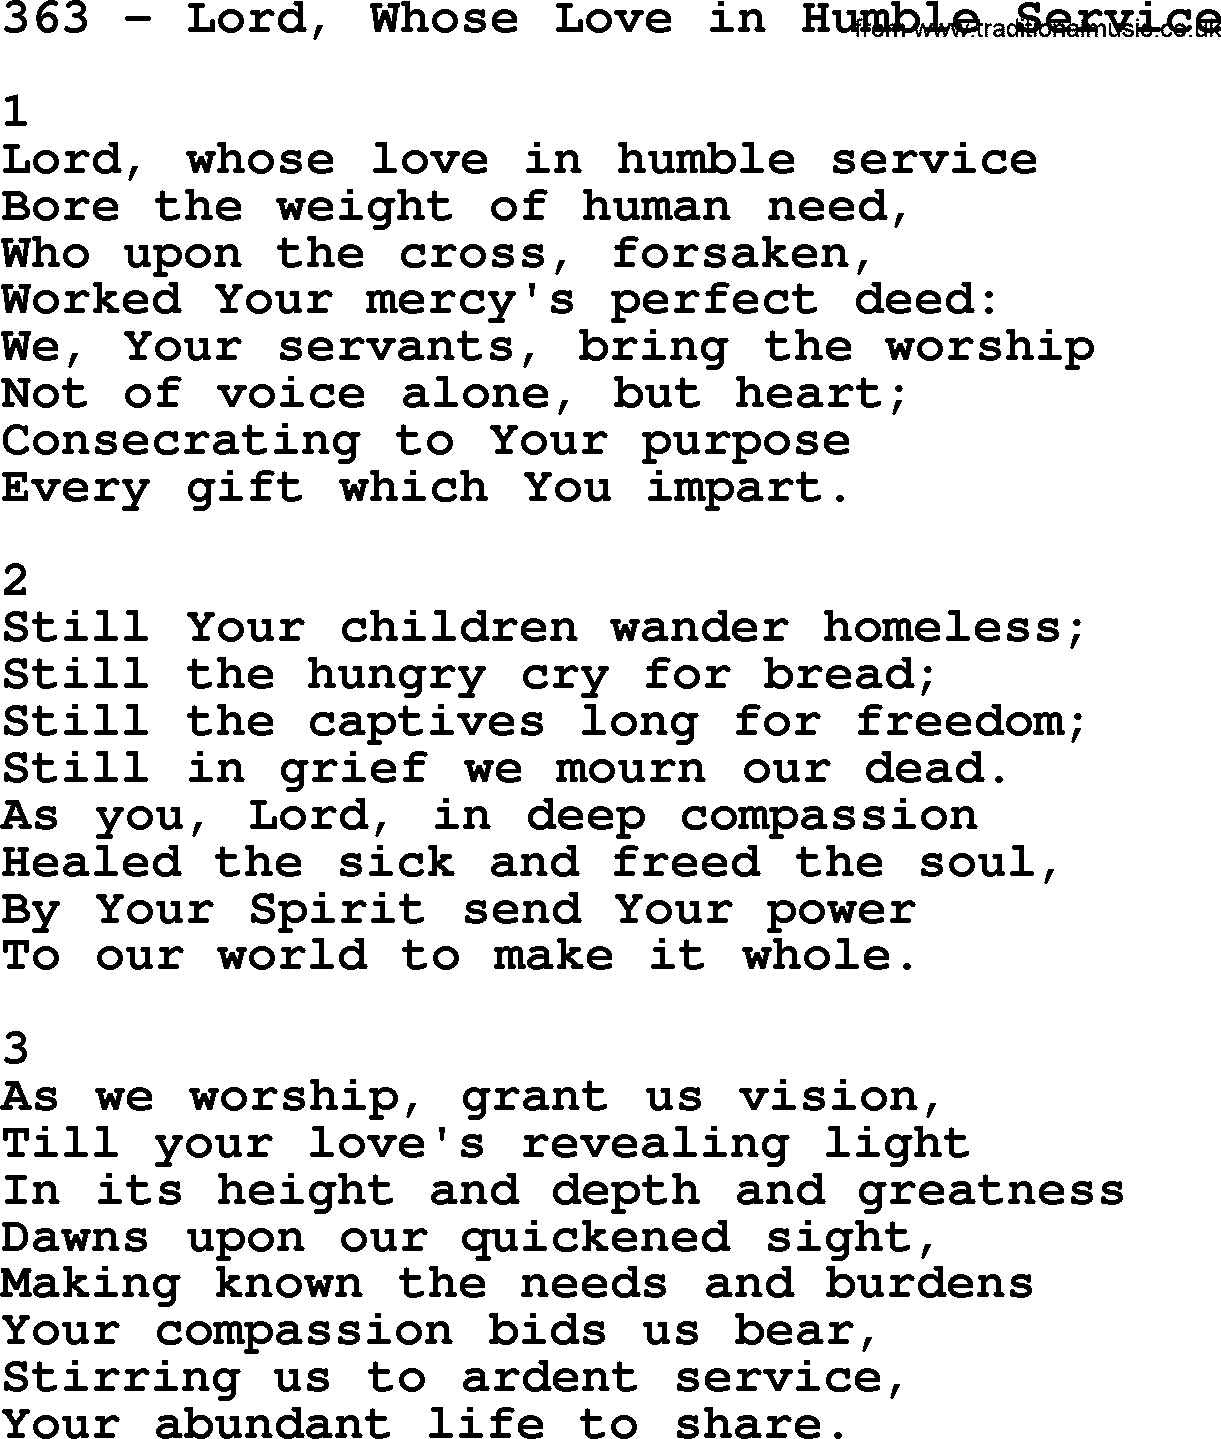 Complete Adventis Hymnal, title: 363-Lord, Whose Love In Humble Service, with lyrics, midi, mp3, powerpoints(PPT) and PDF,